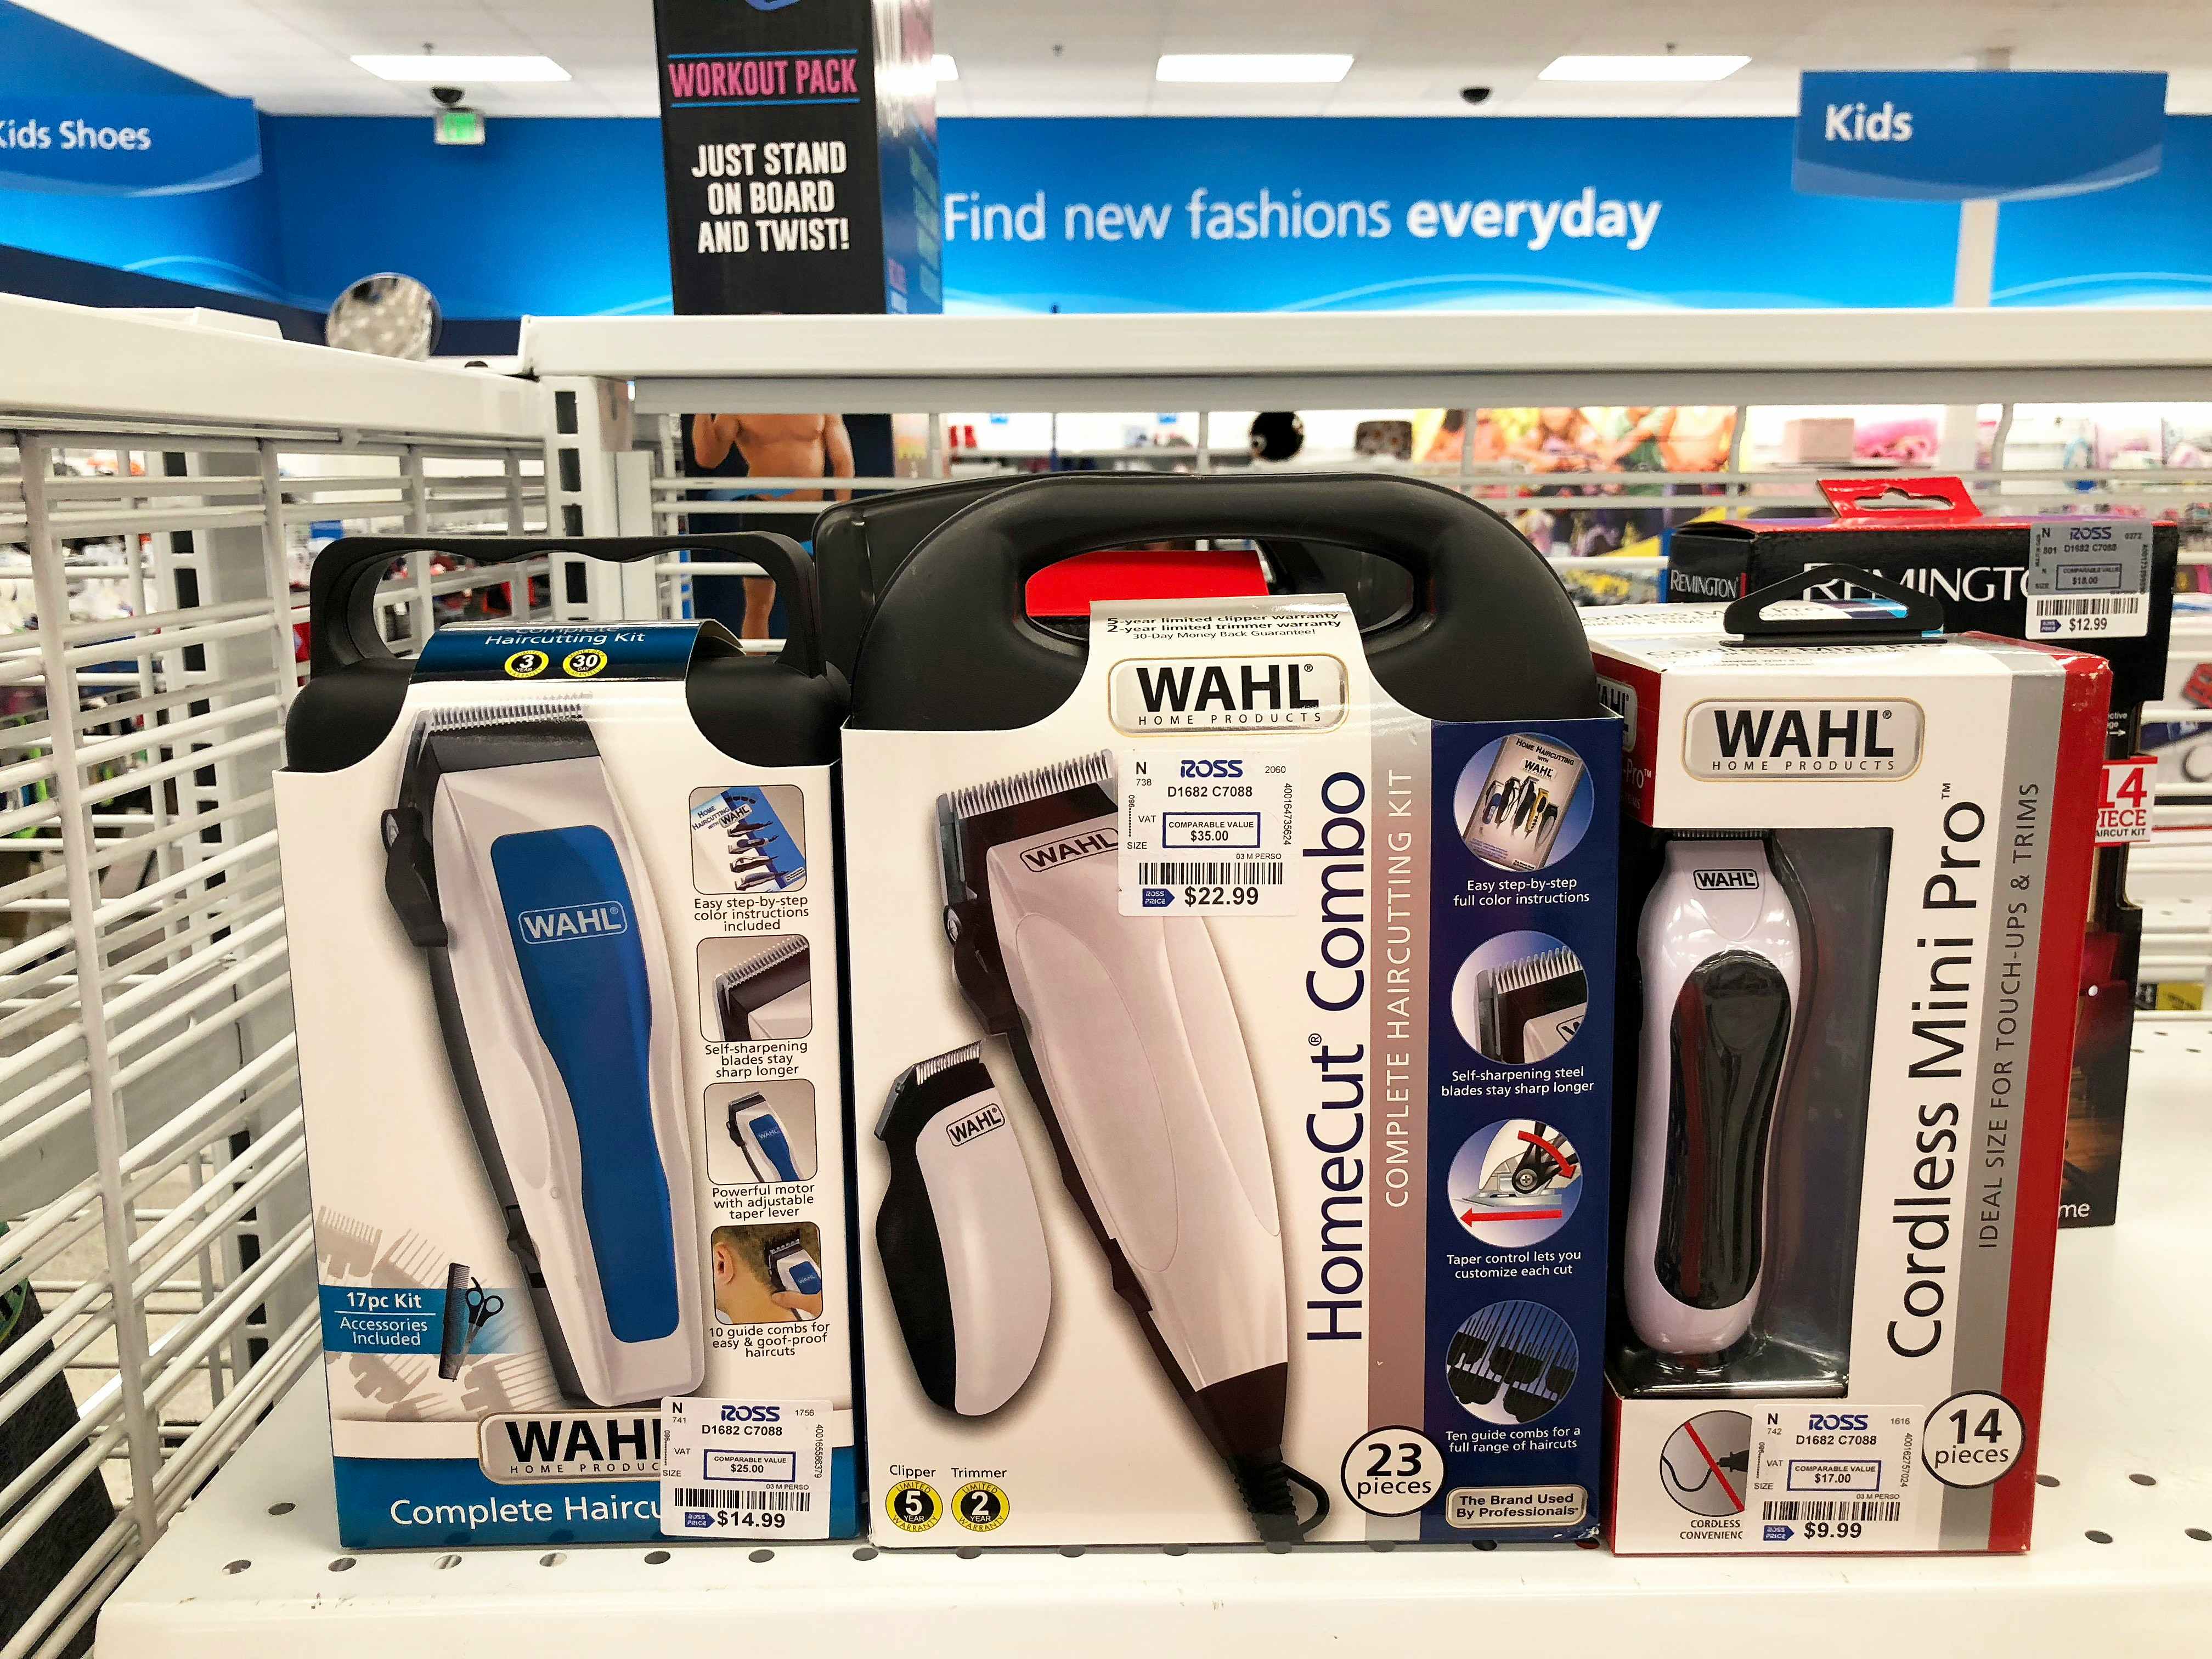 Wahl Cordless Mini Pro for $9.99 at Ross versus $19.99 at Amazon.